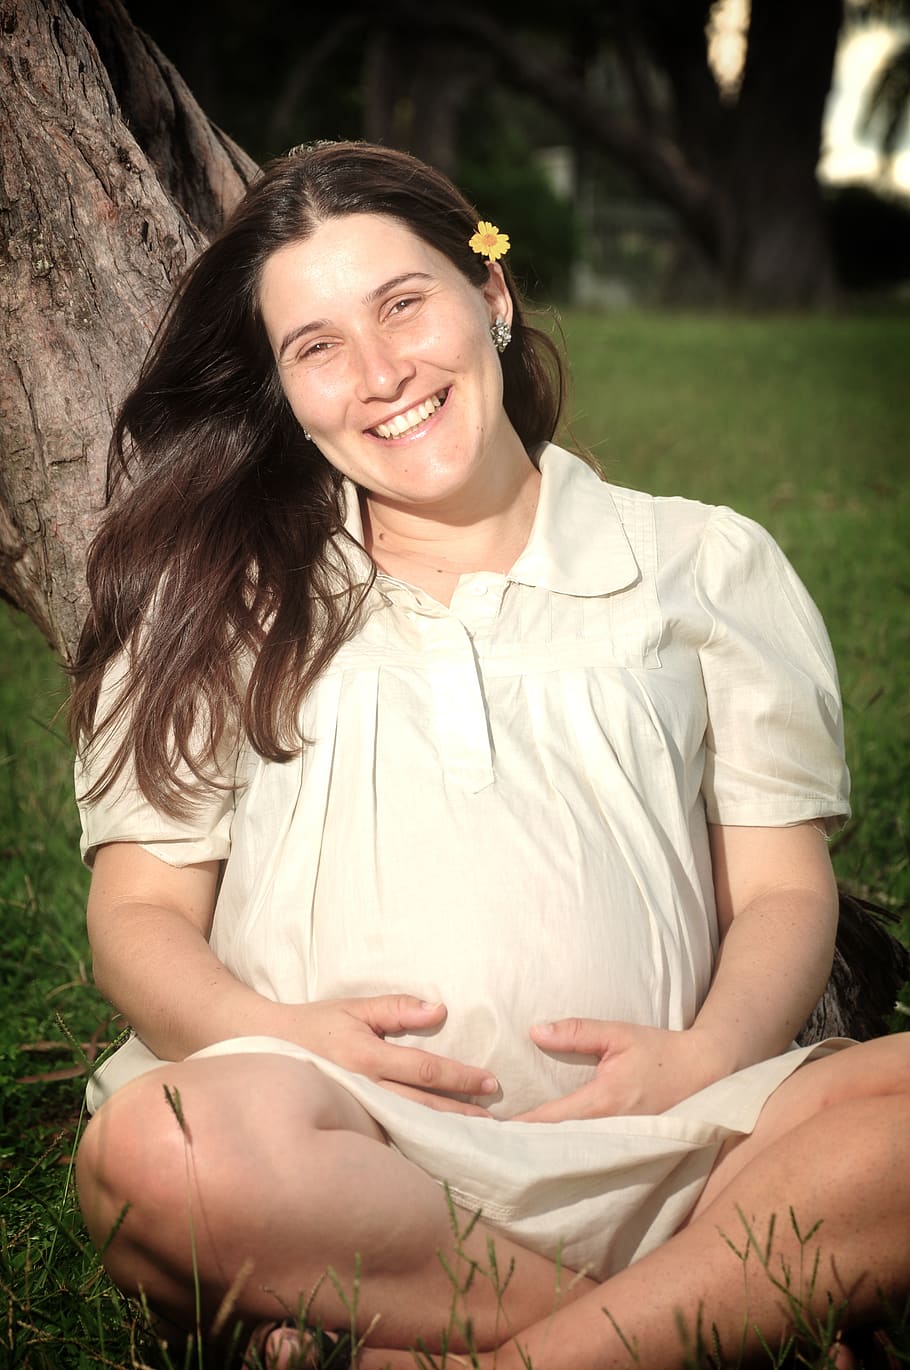 pregnant woman, gestation, pregnant, mother, belly, family, love, woman, baby, mom